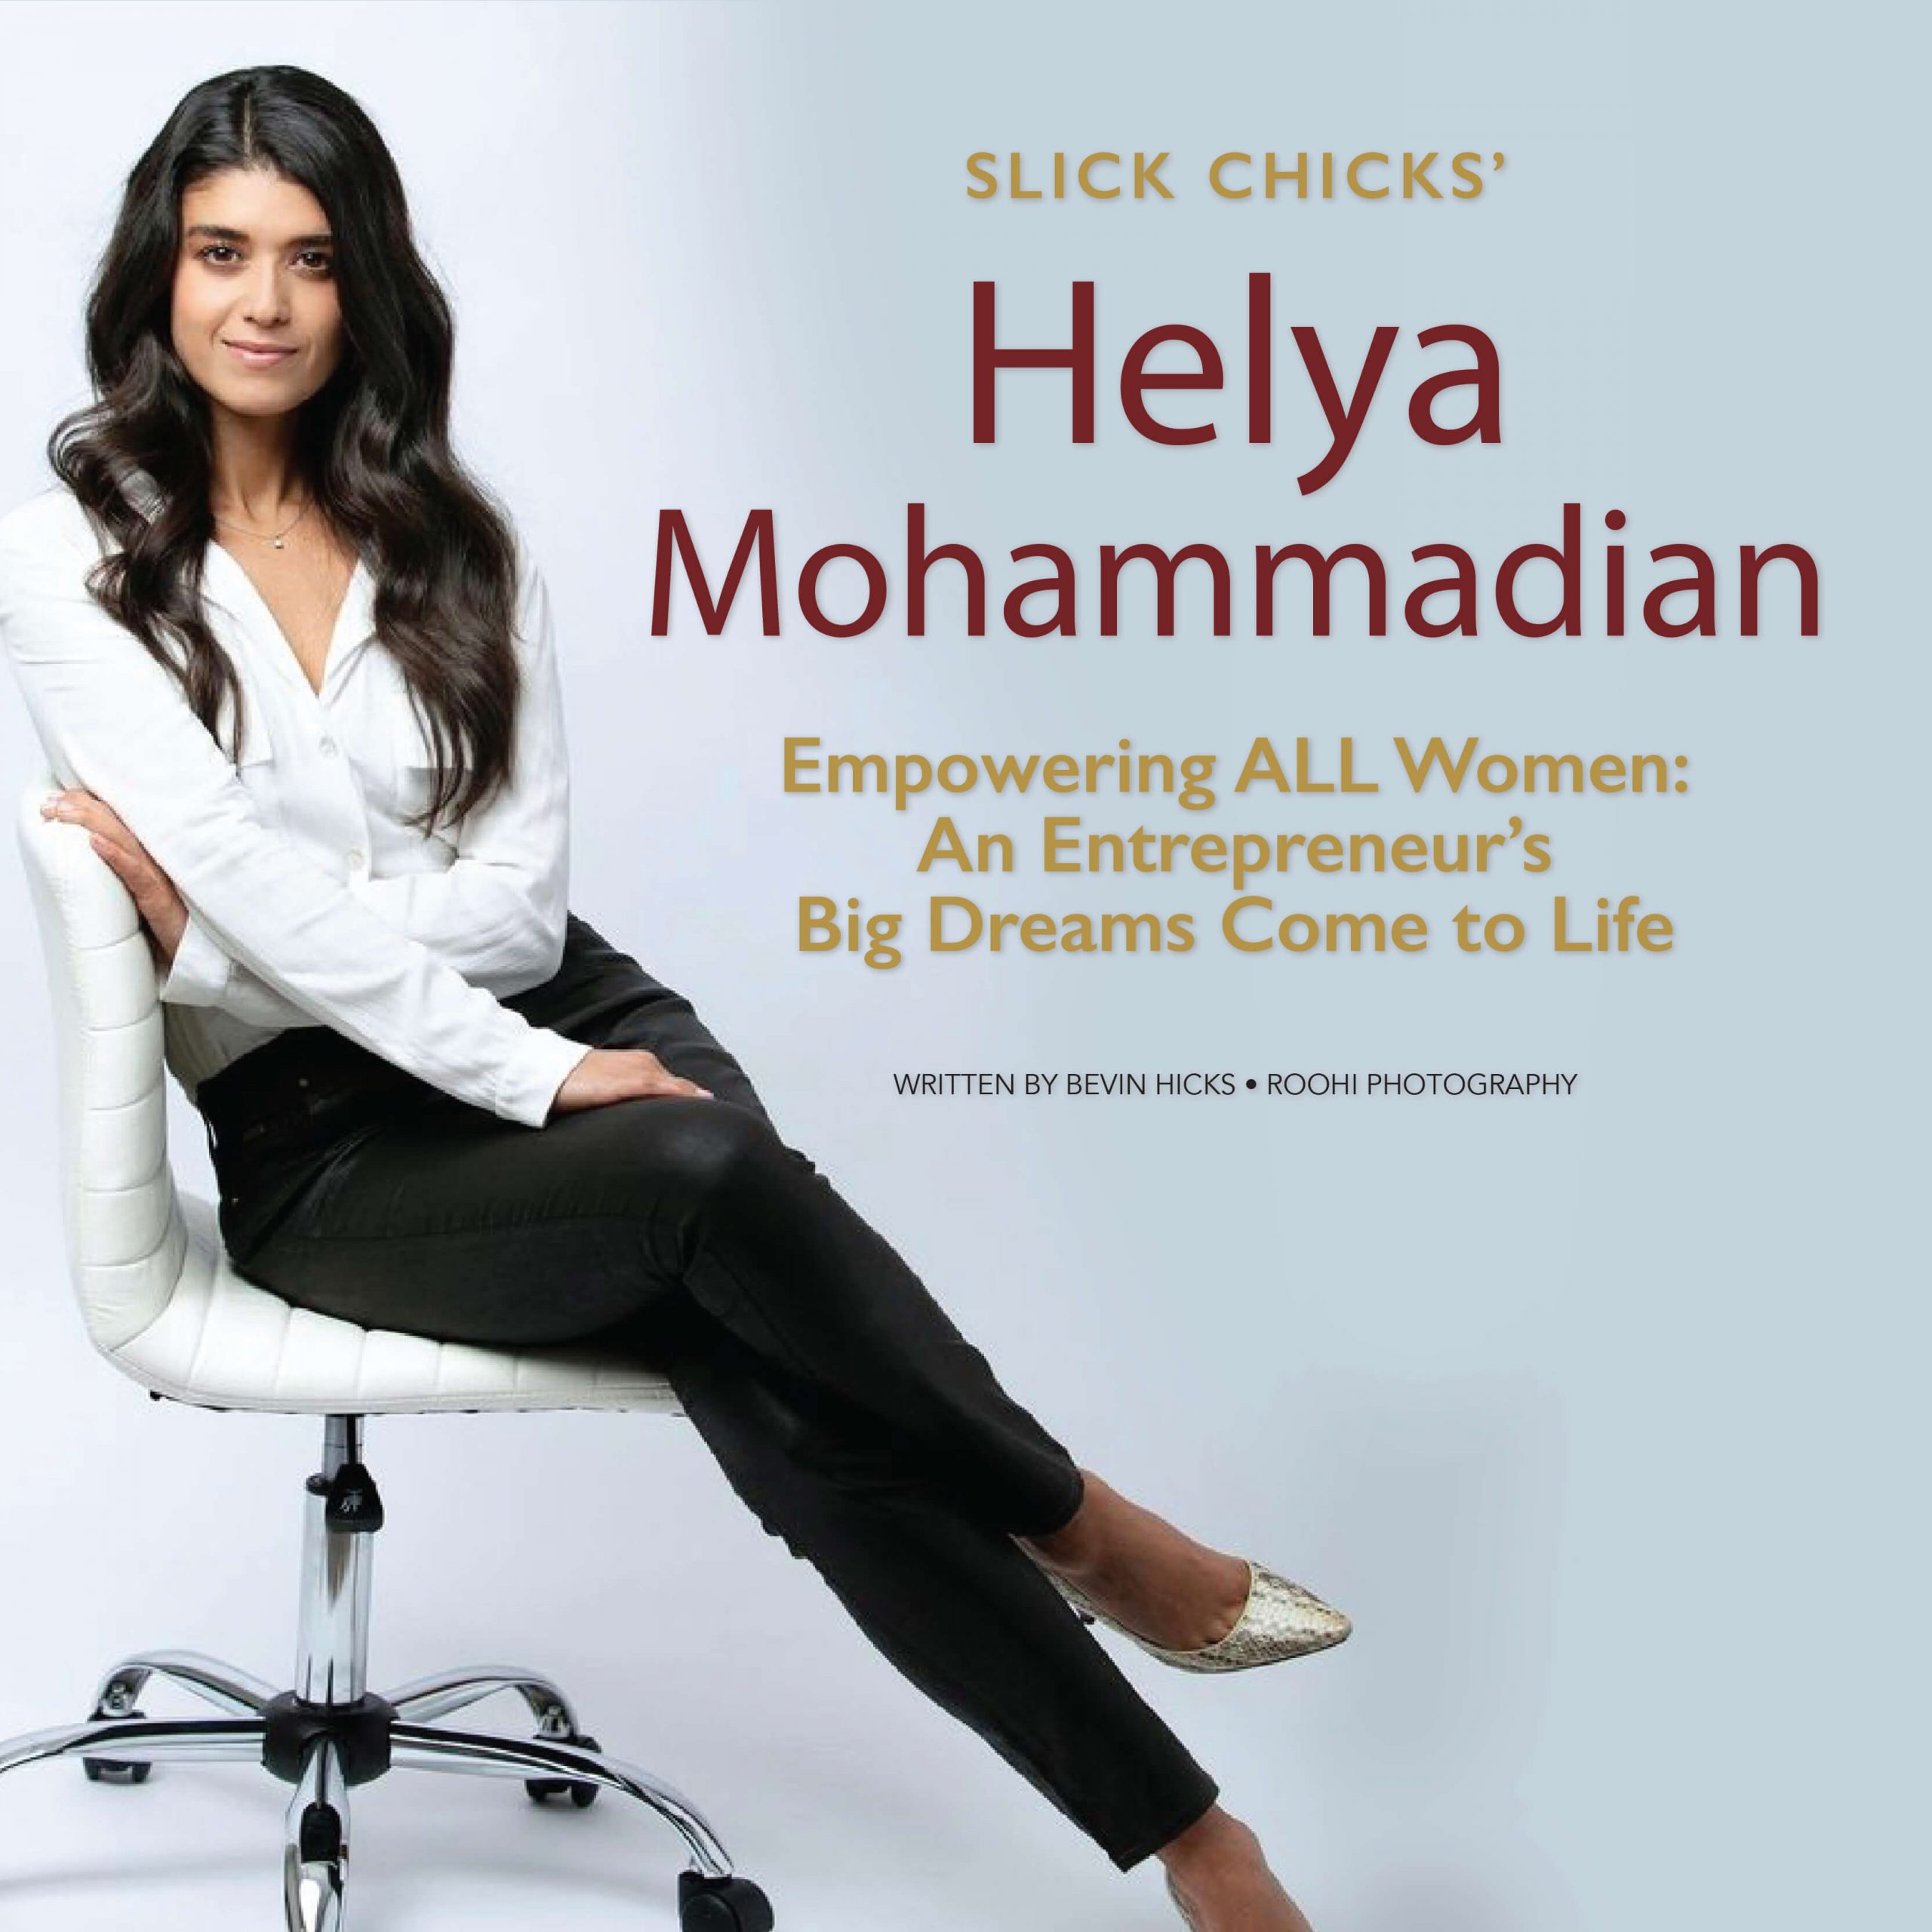 SLICK CHICKS' Helya Mohammadian – Empowering ALL Women: An Entrepreneur's  Big Dreams Come to Life